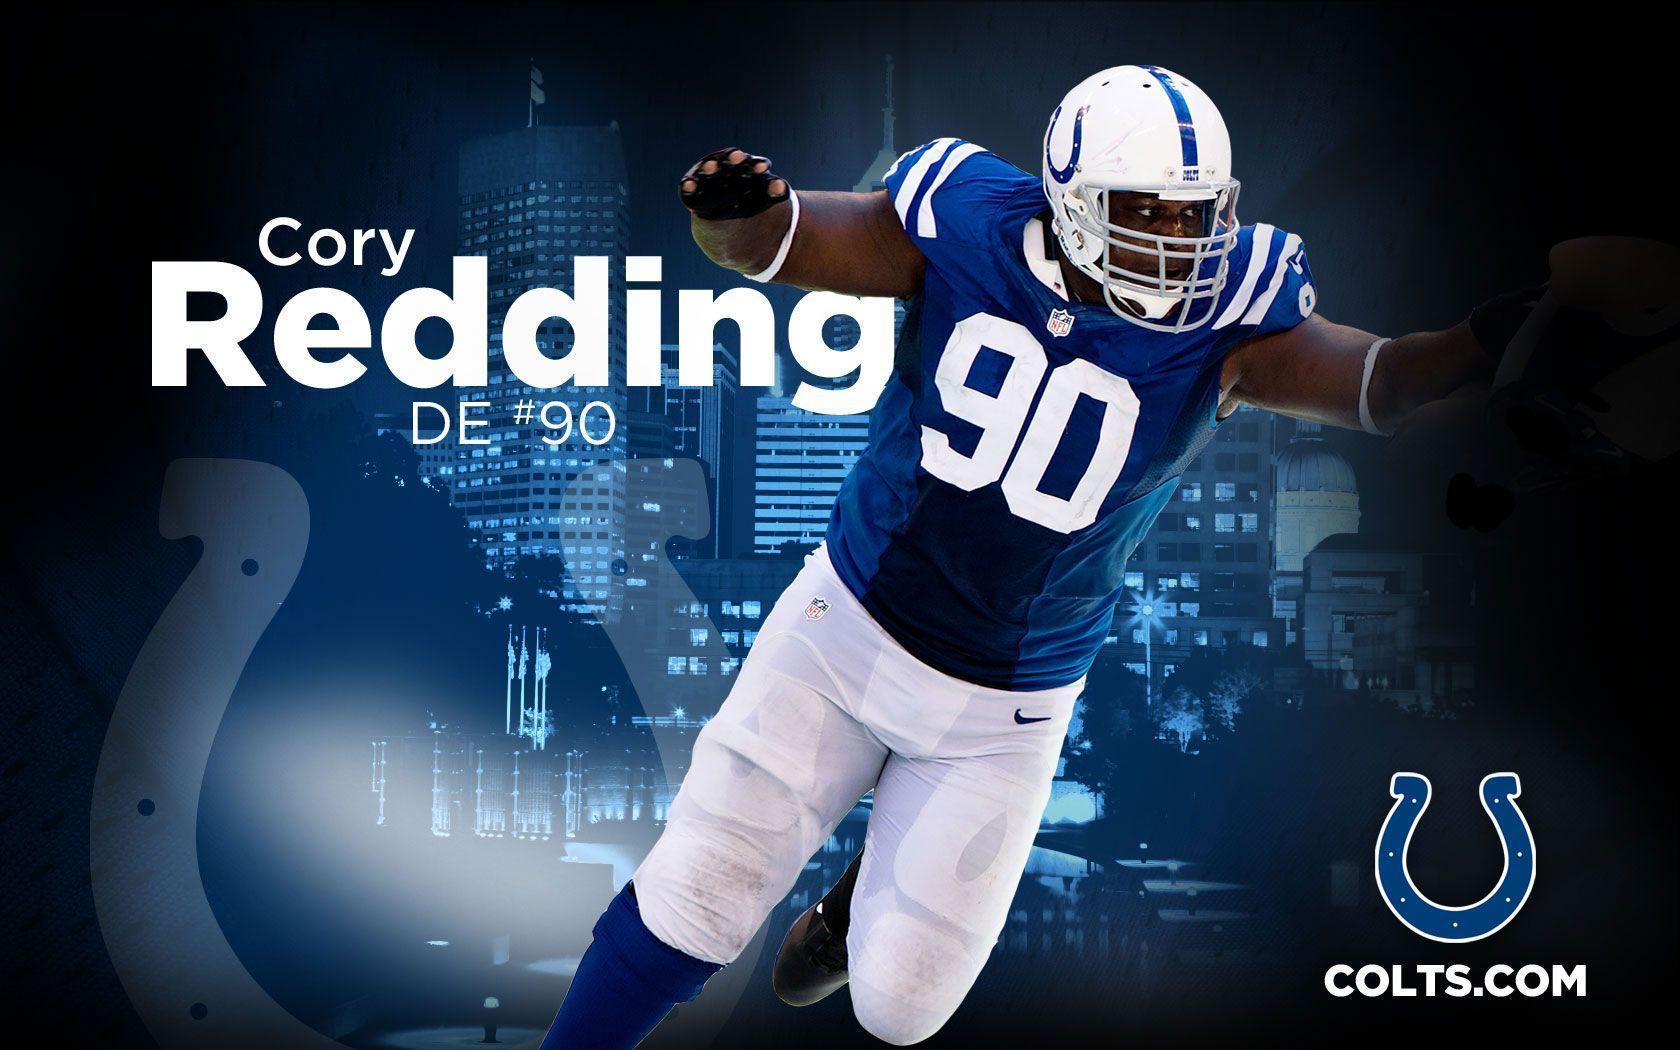 Enjoy our wallpapers of the week!!! Indianapolis Colts wallpapers